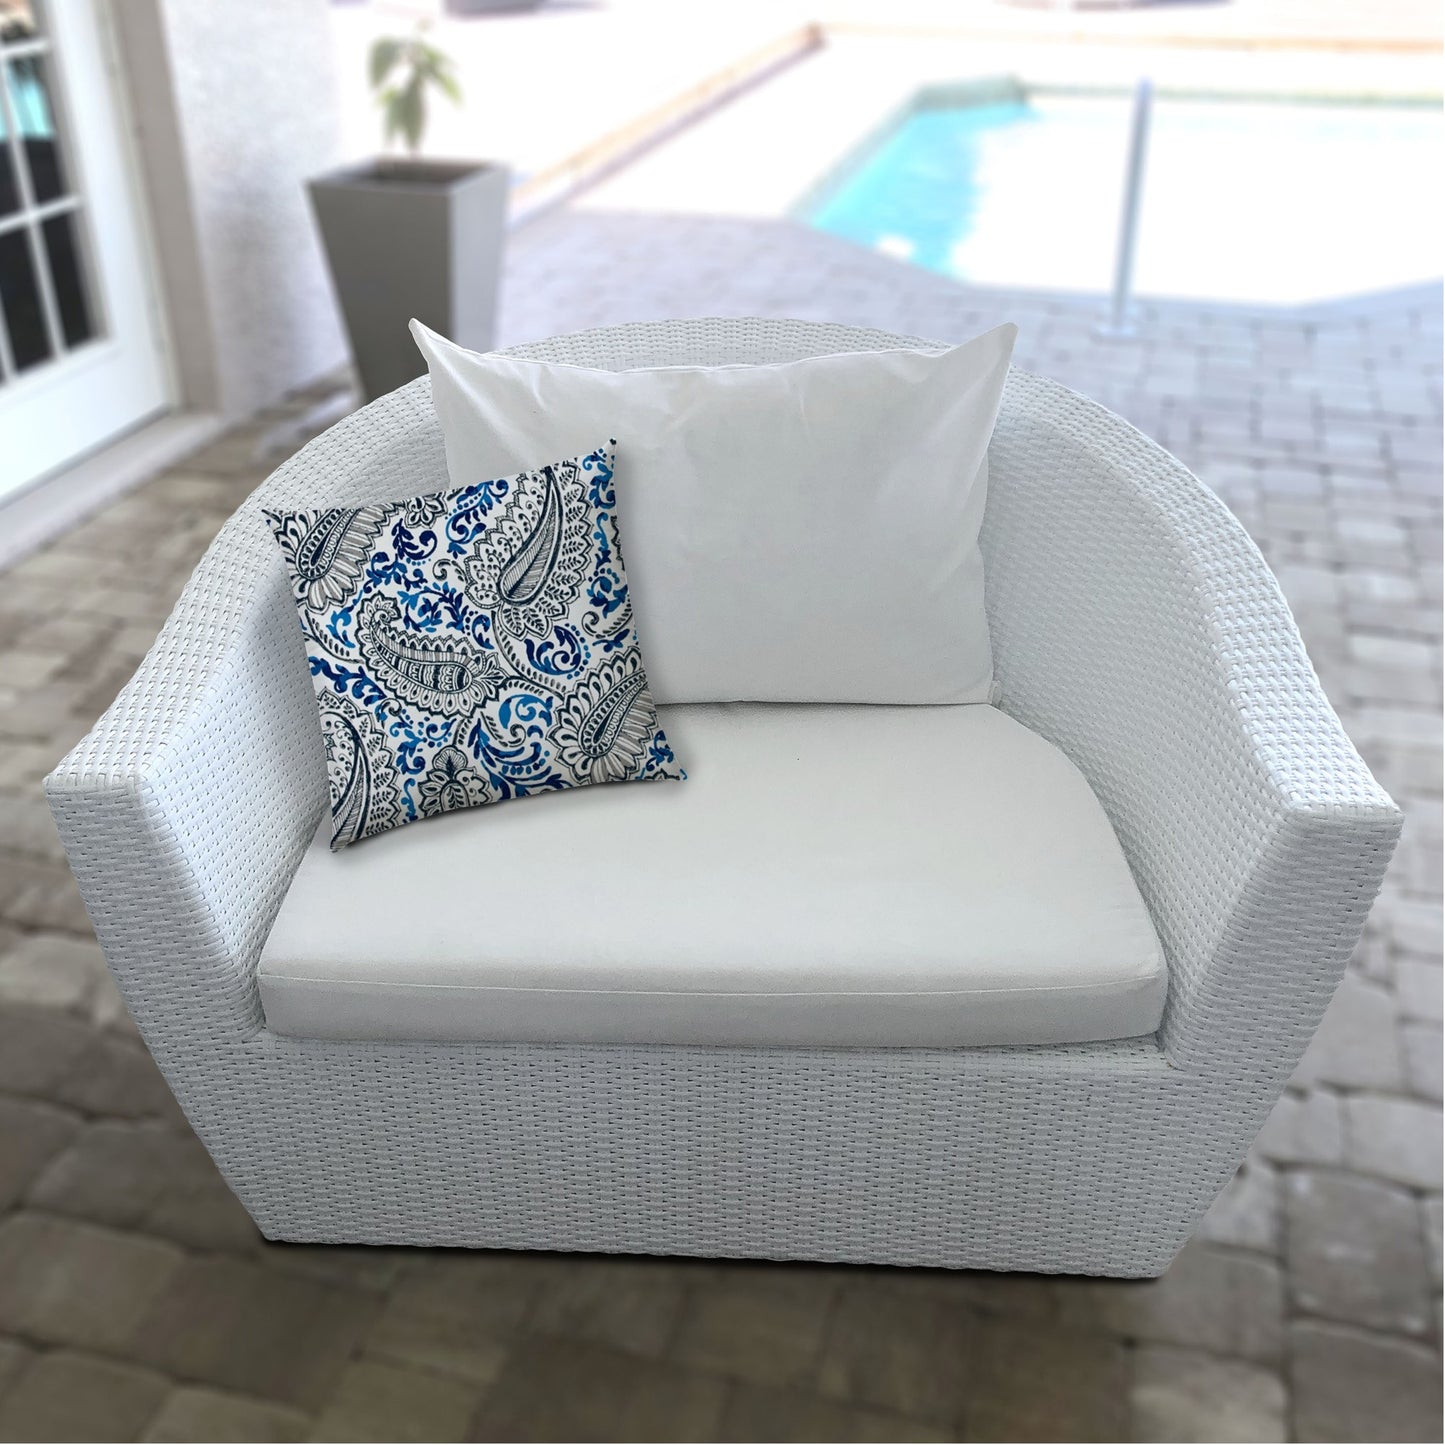 14" X 20" White And Blue Blown Seam Paisley Lumbar Indoor Outdoor Pillow